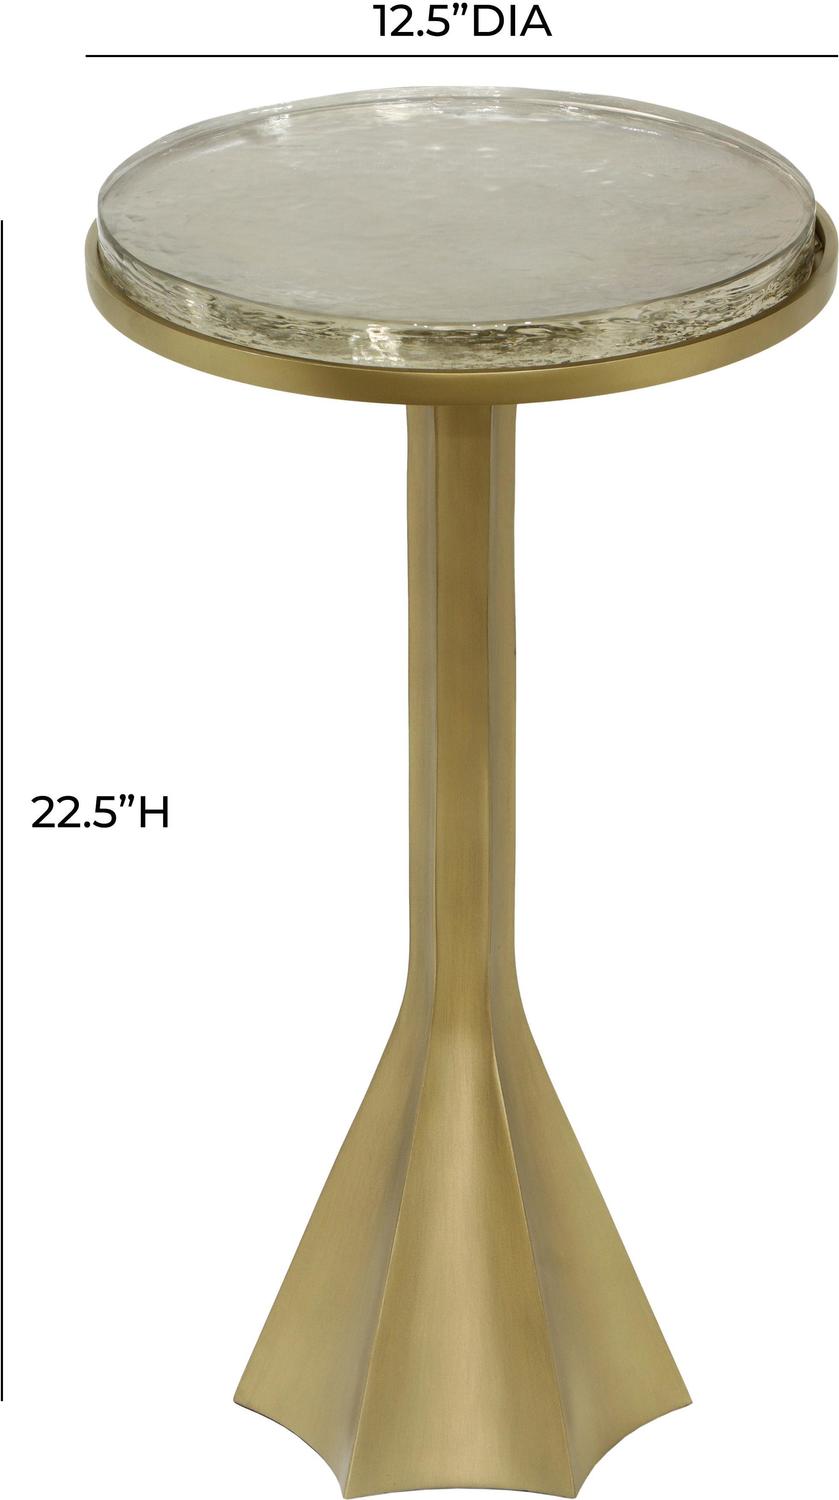 side table design wood Contemporary Design Furniture Side Tables Antique Brass